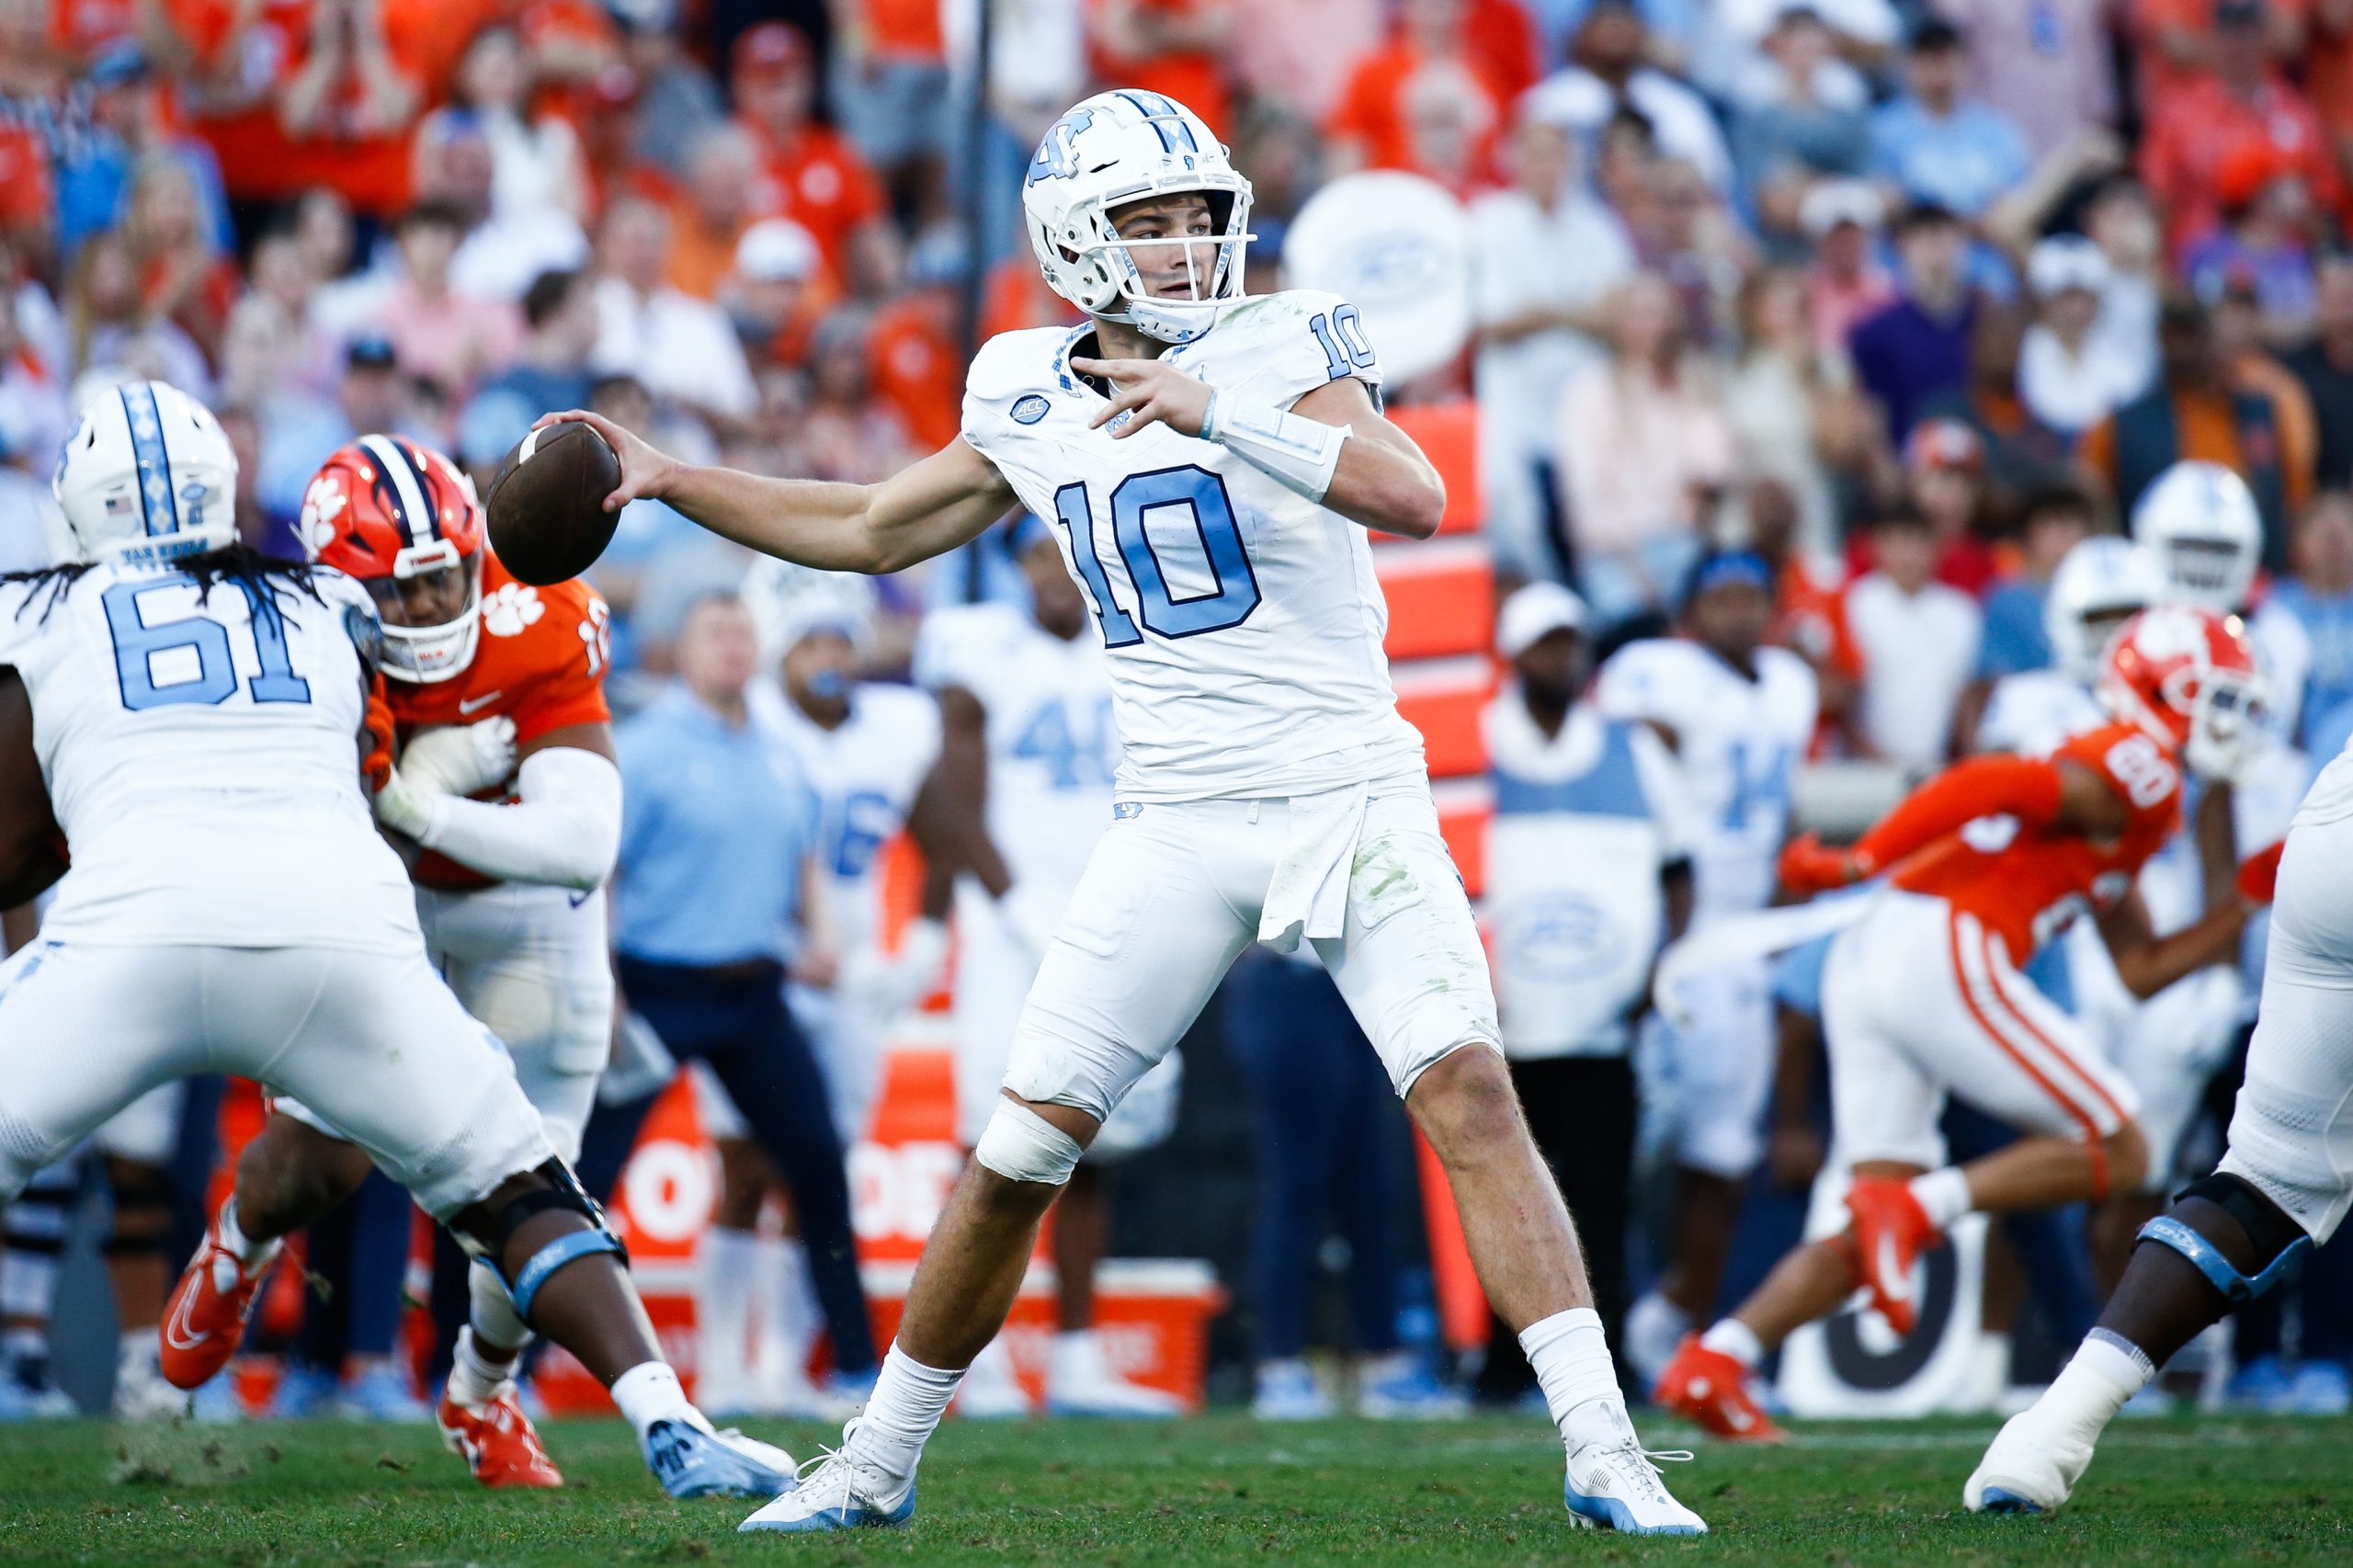 Drake Maye #10 of the North Carolina Tar Heels passes the ball during the second quarter against th...